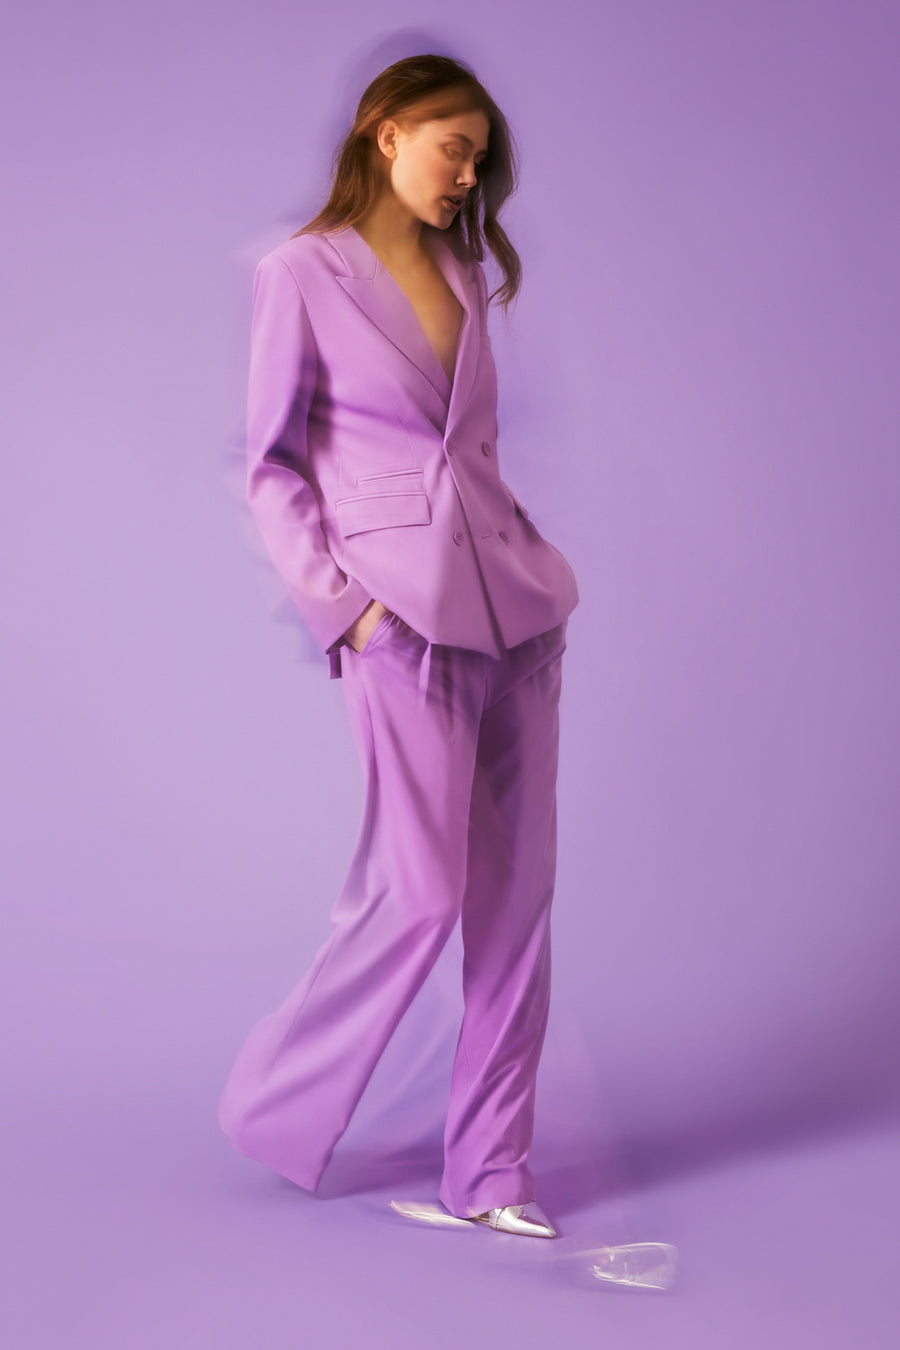 Tonal Styling Radiant Orchid